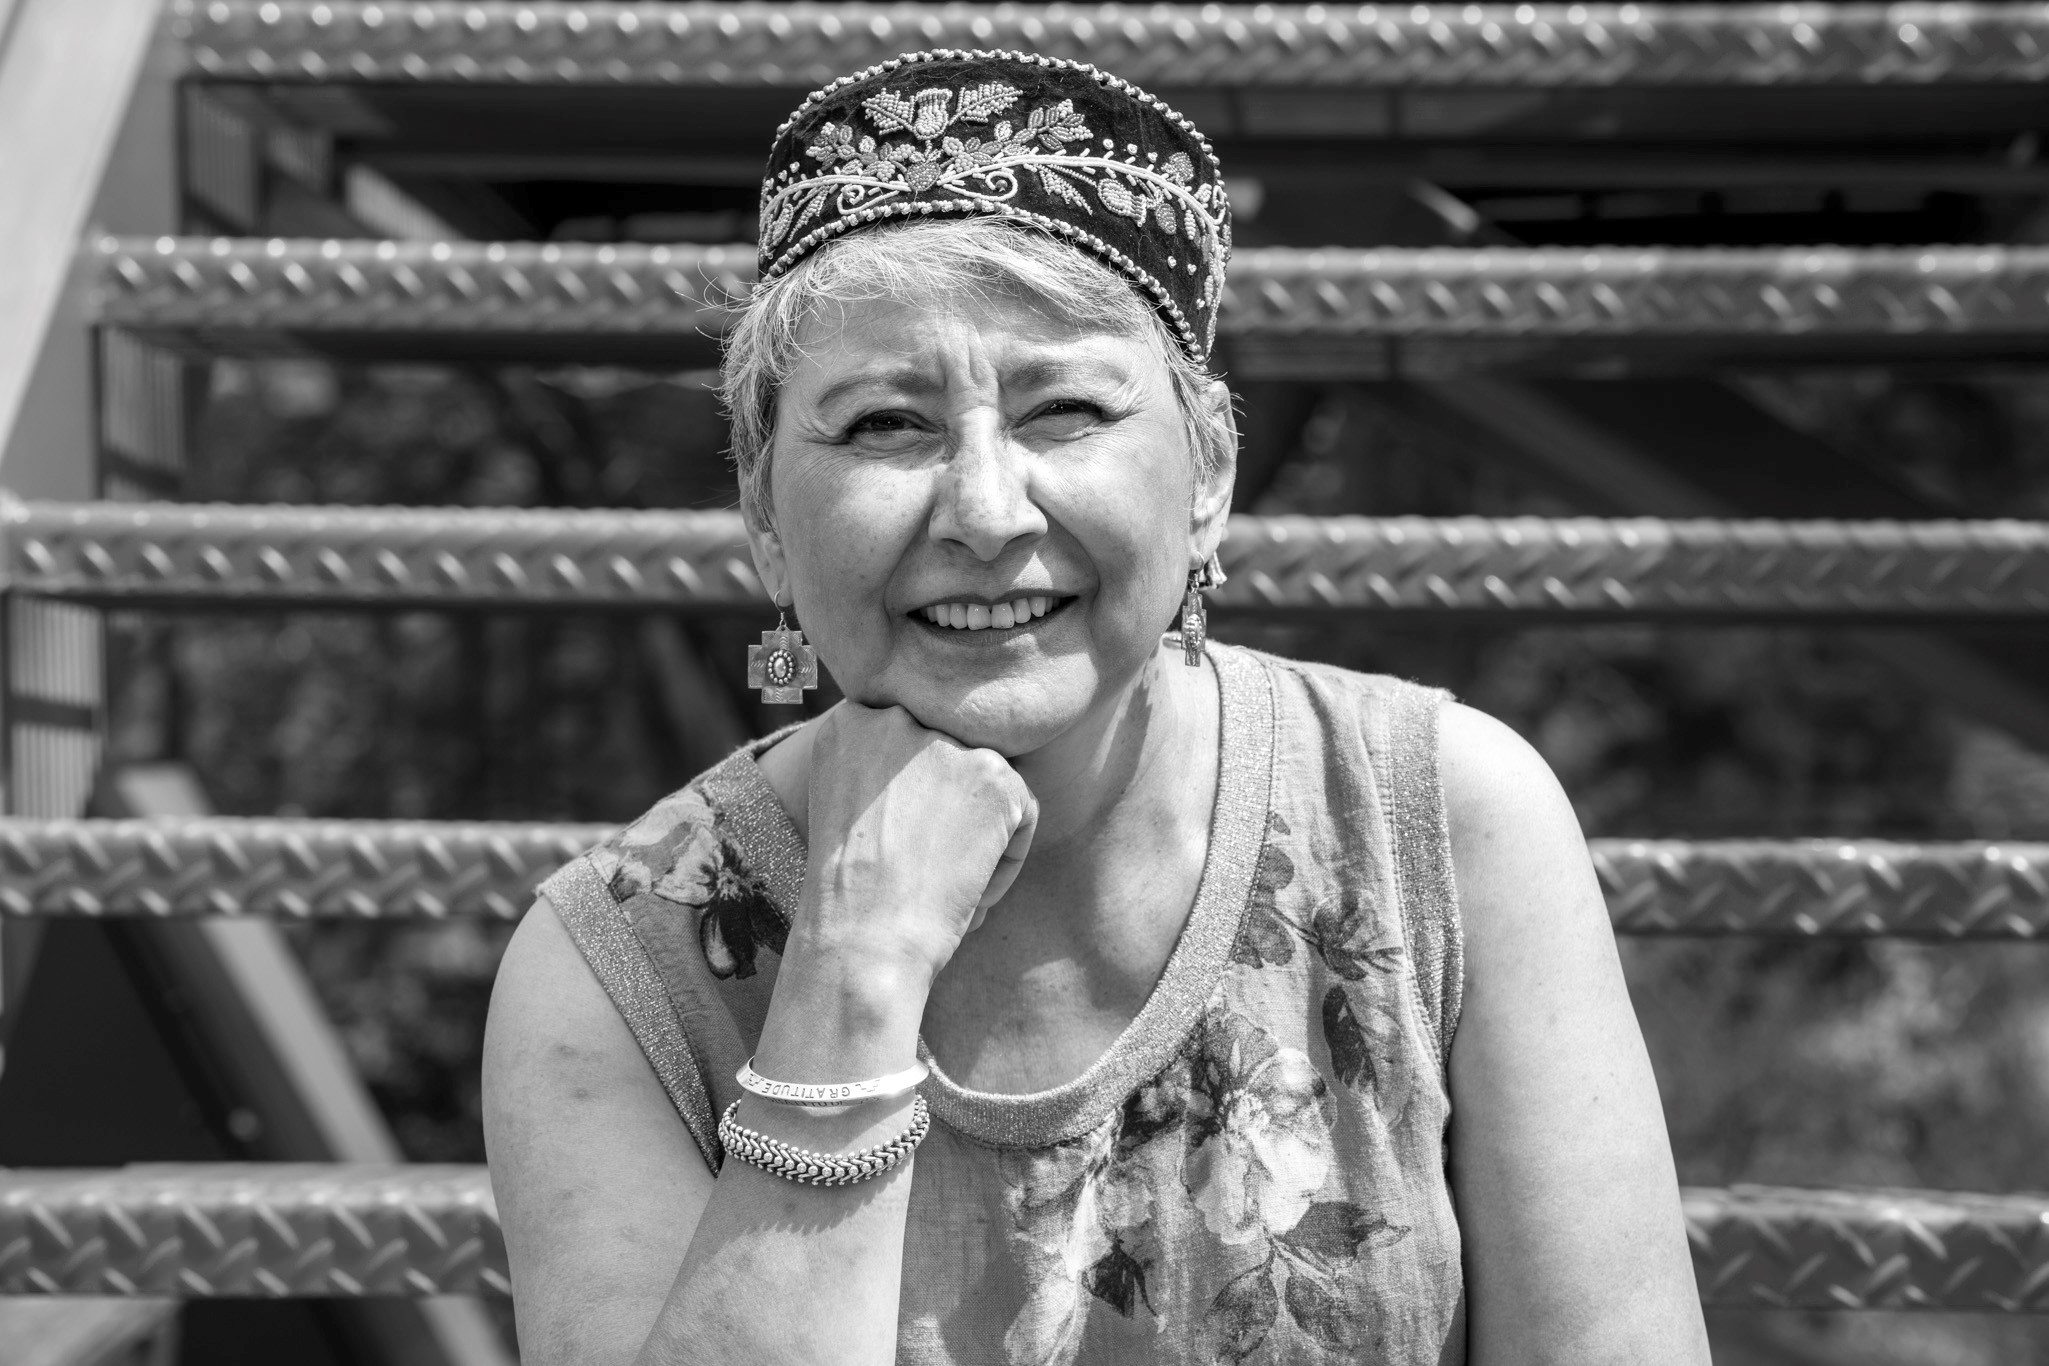 a black and white image of a person with white hair in a tank top with flowers printed on it, two bracelets, large square-ish earrings, and a circular hat with embroidered leaves and flowers; she is sitting on an outside staircase, smiling and squinting with one hand supporting her chin.